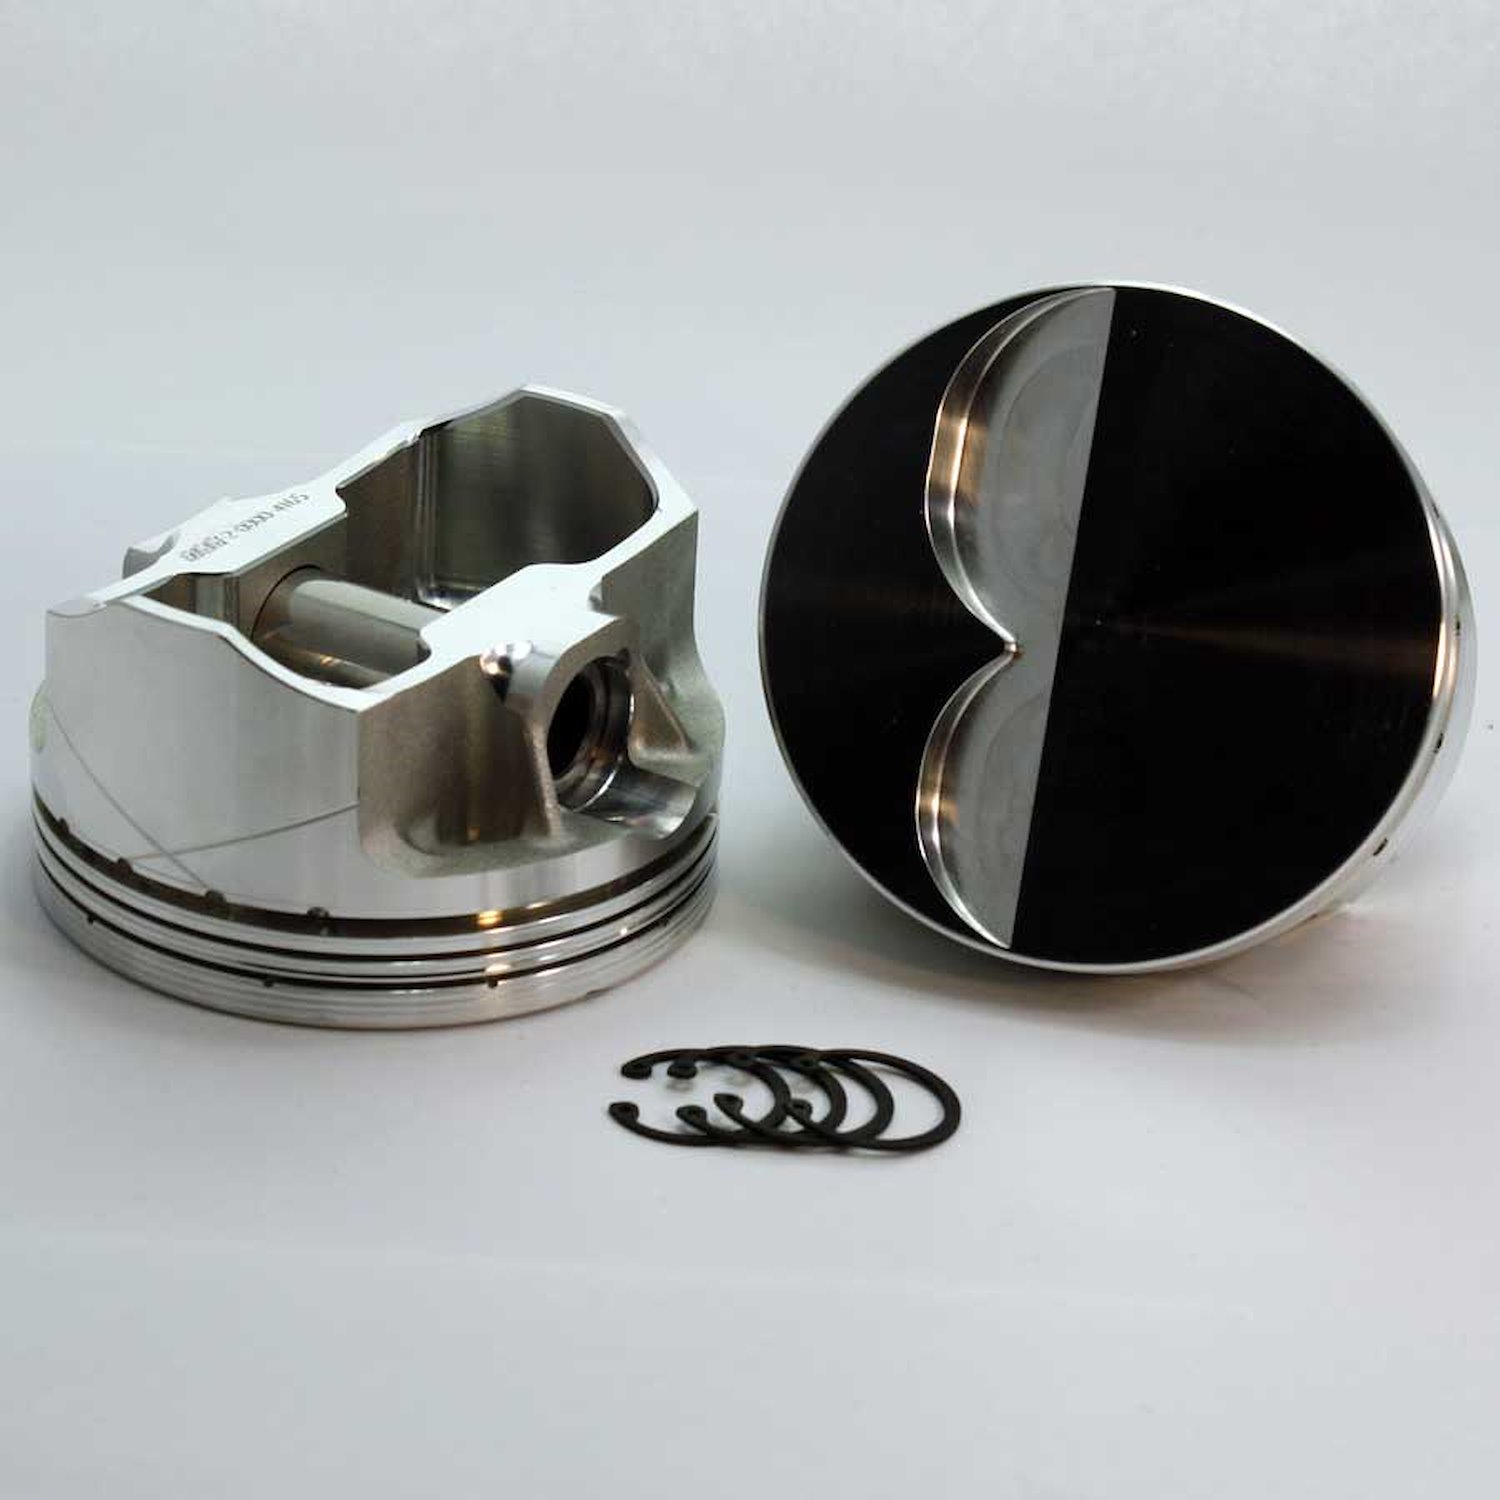 1-3400-4040 FX-Series Flat Top Piston Set for 1962-2001 Small Block Ford 289-302, 4.040 in. Bore, -4cc Volume [OEM Stroke]